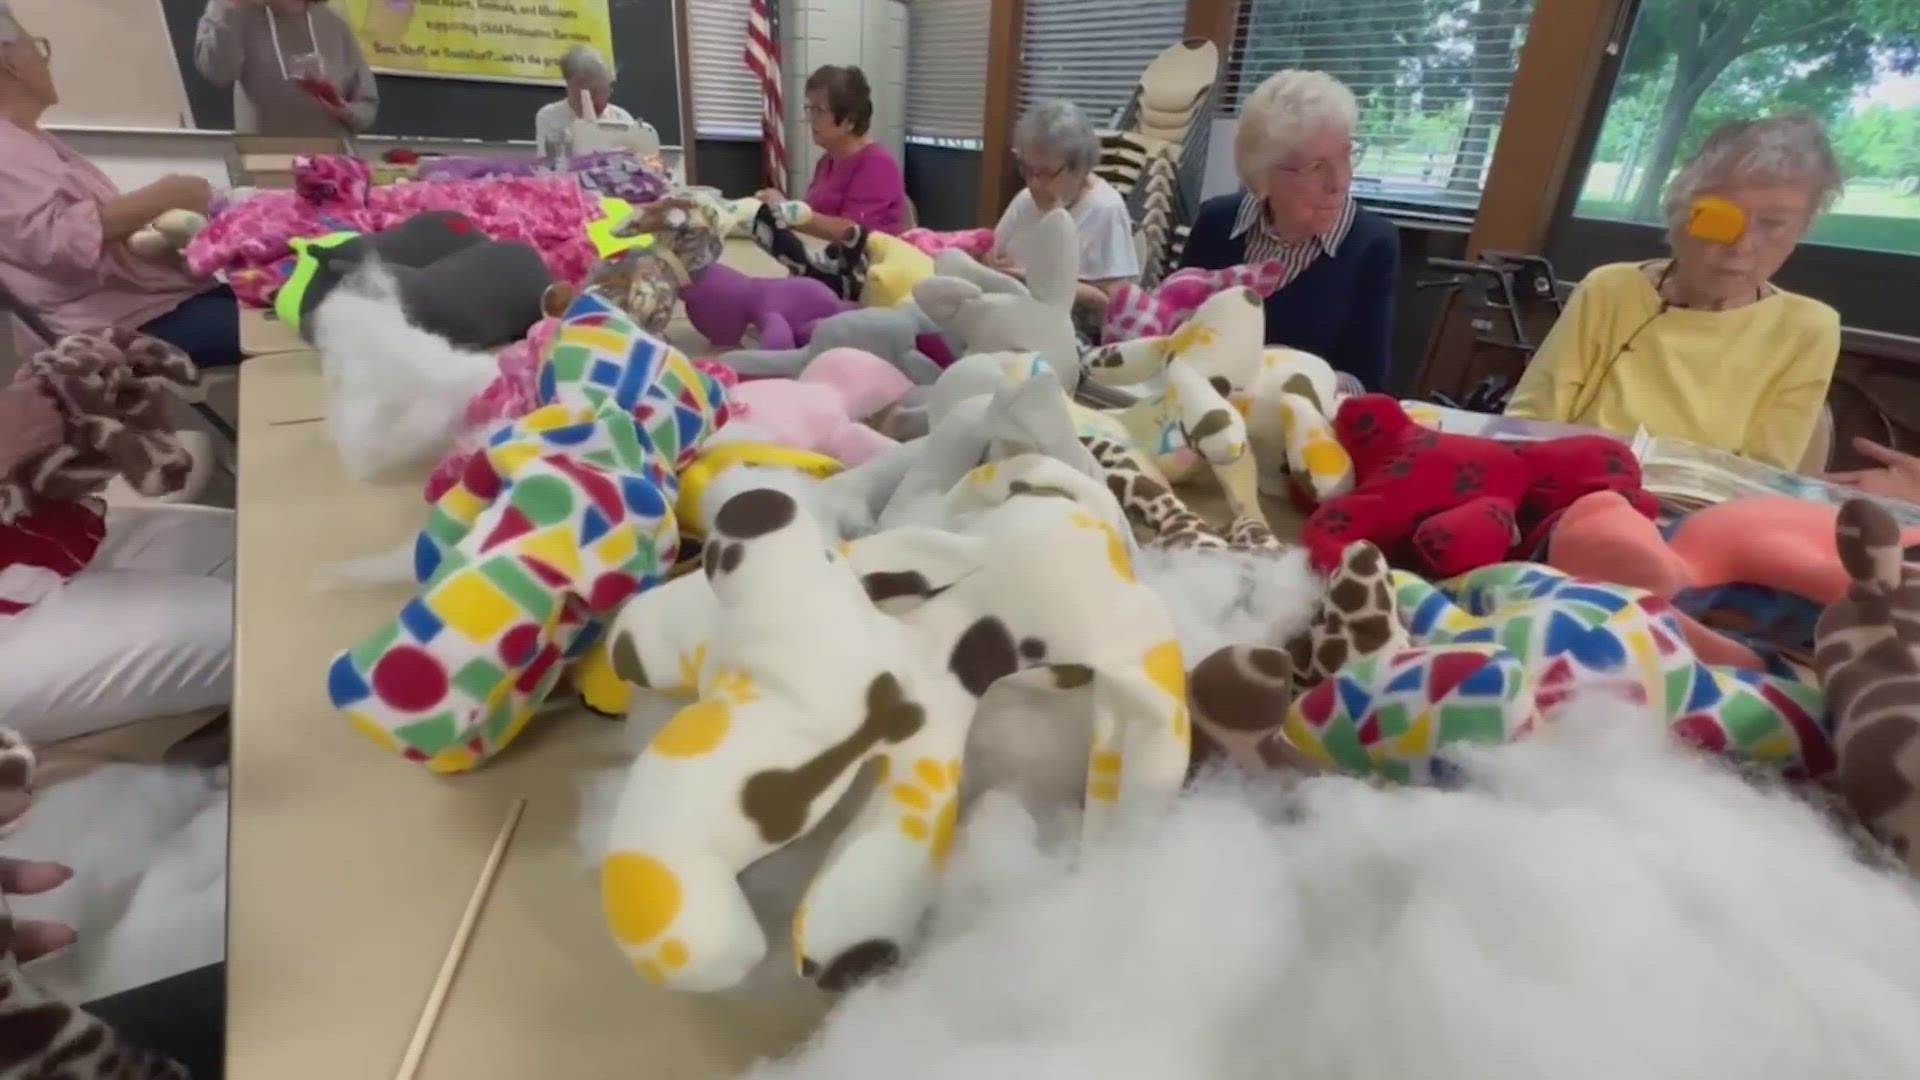 Sacramento County officials recently praised the group of mostly-retired Parkway area women for donating 44 handmade stuffed animals to children.